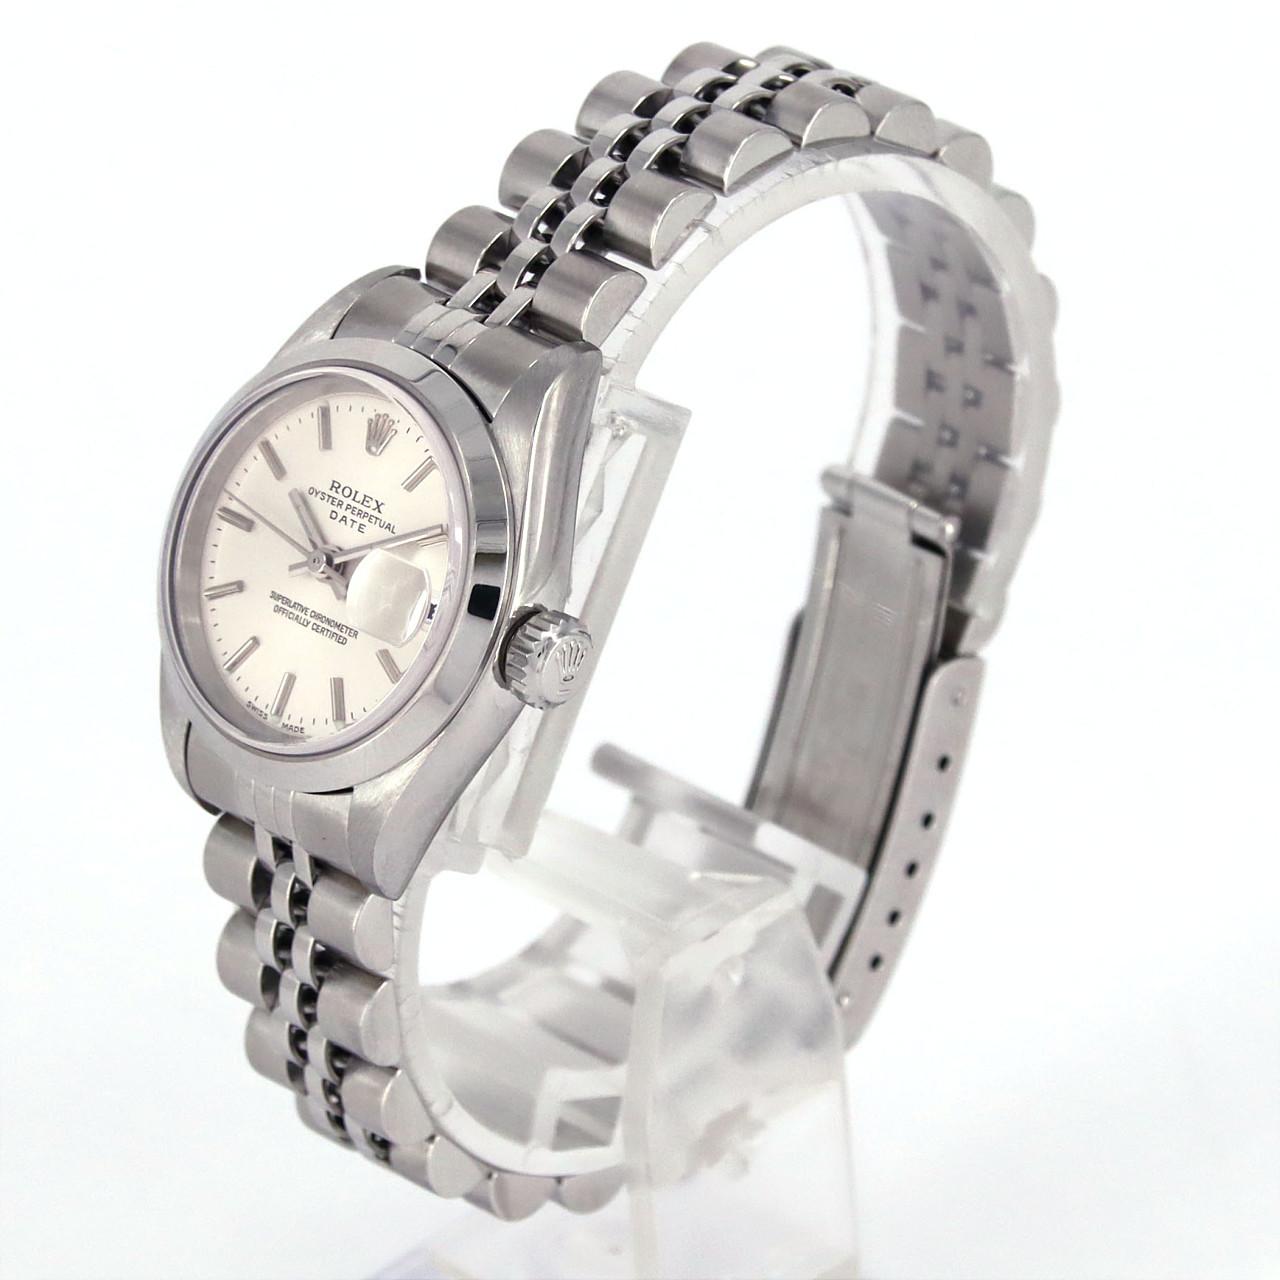 ROLEX Oyster Perpetual Date 79160-5 SS Automatic A